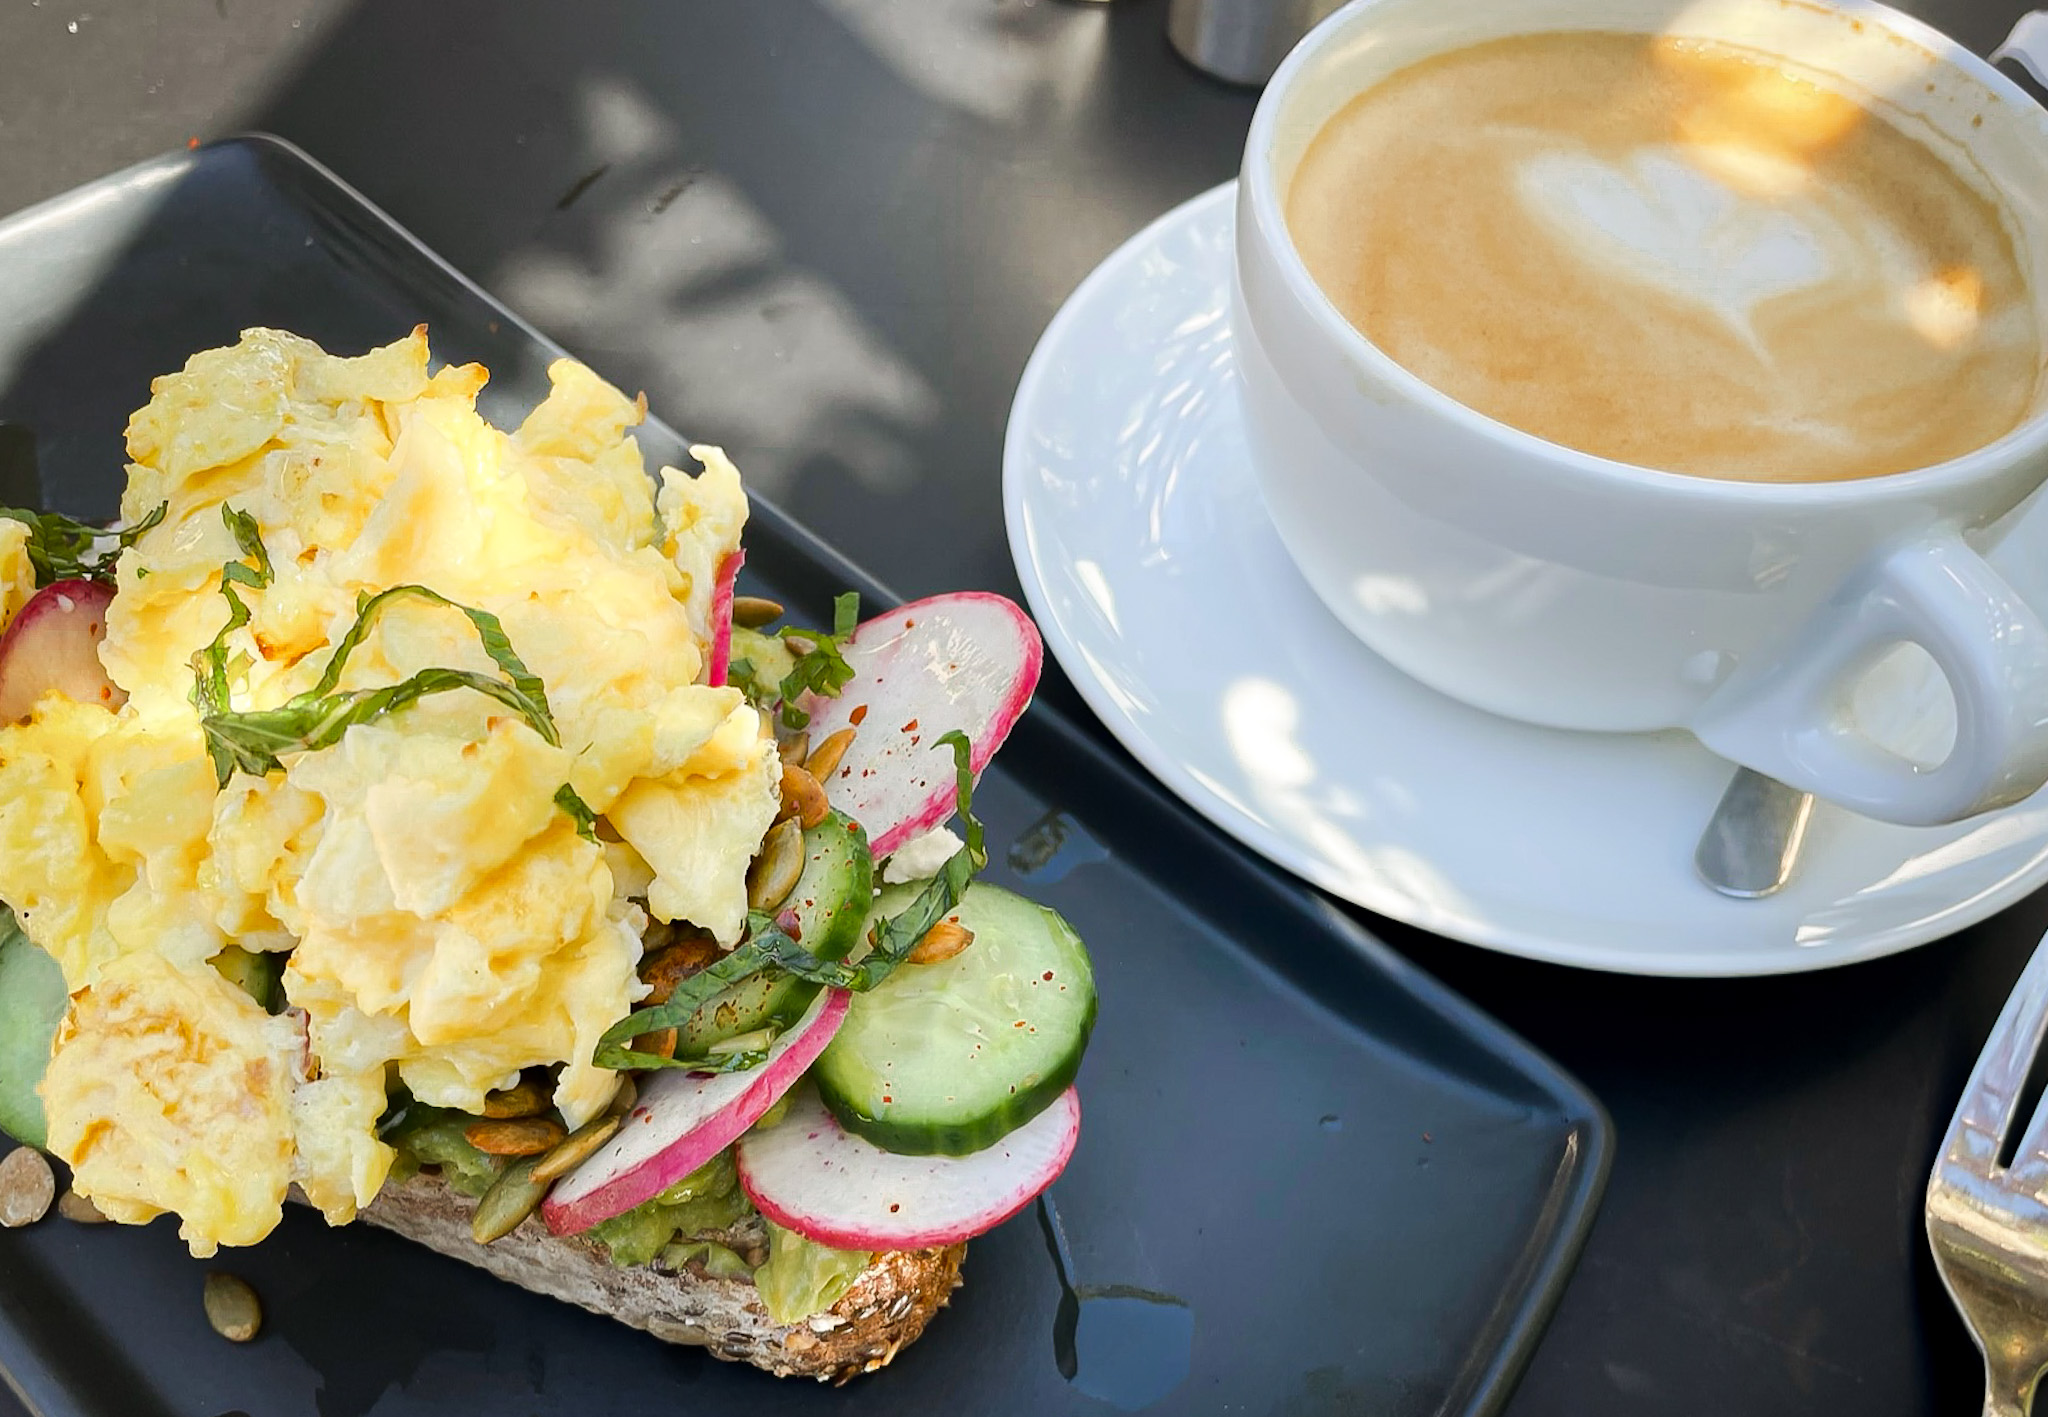 Avocado toast with egg and salted honey lavender latte from Southside restaurant Yountville